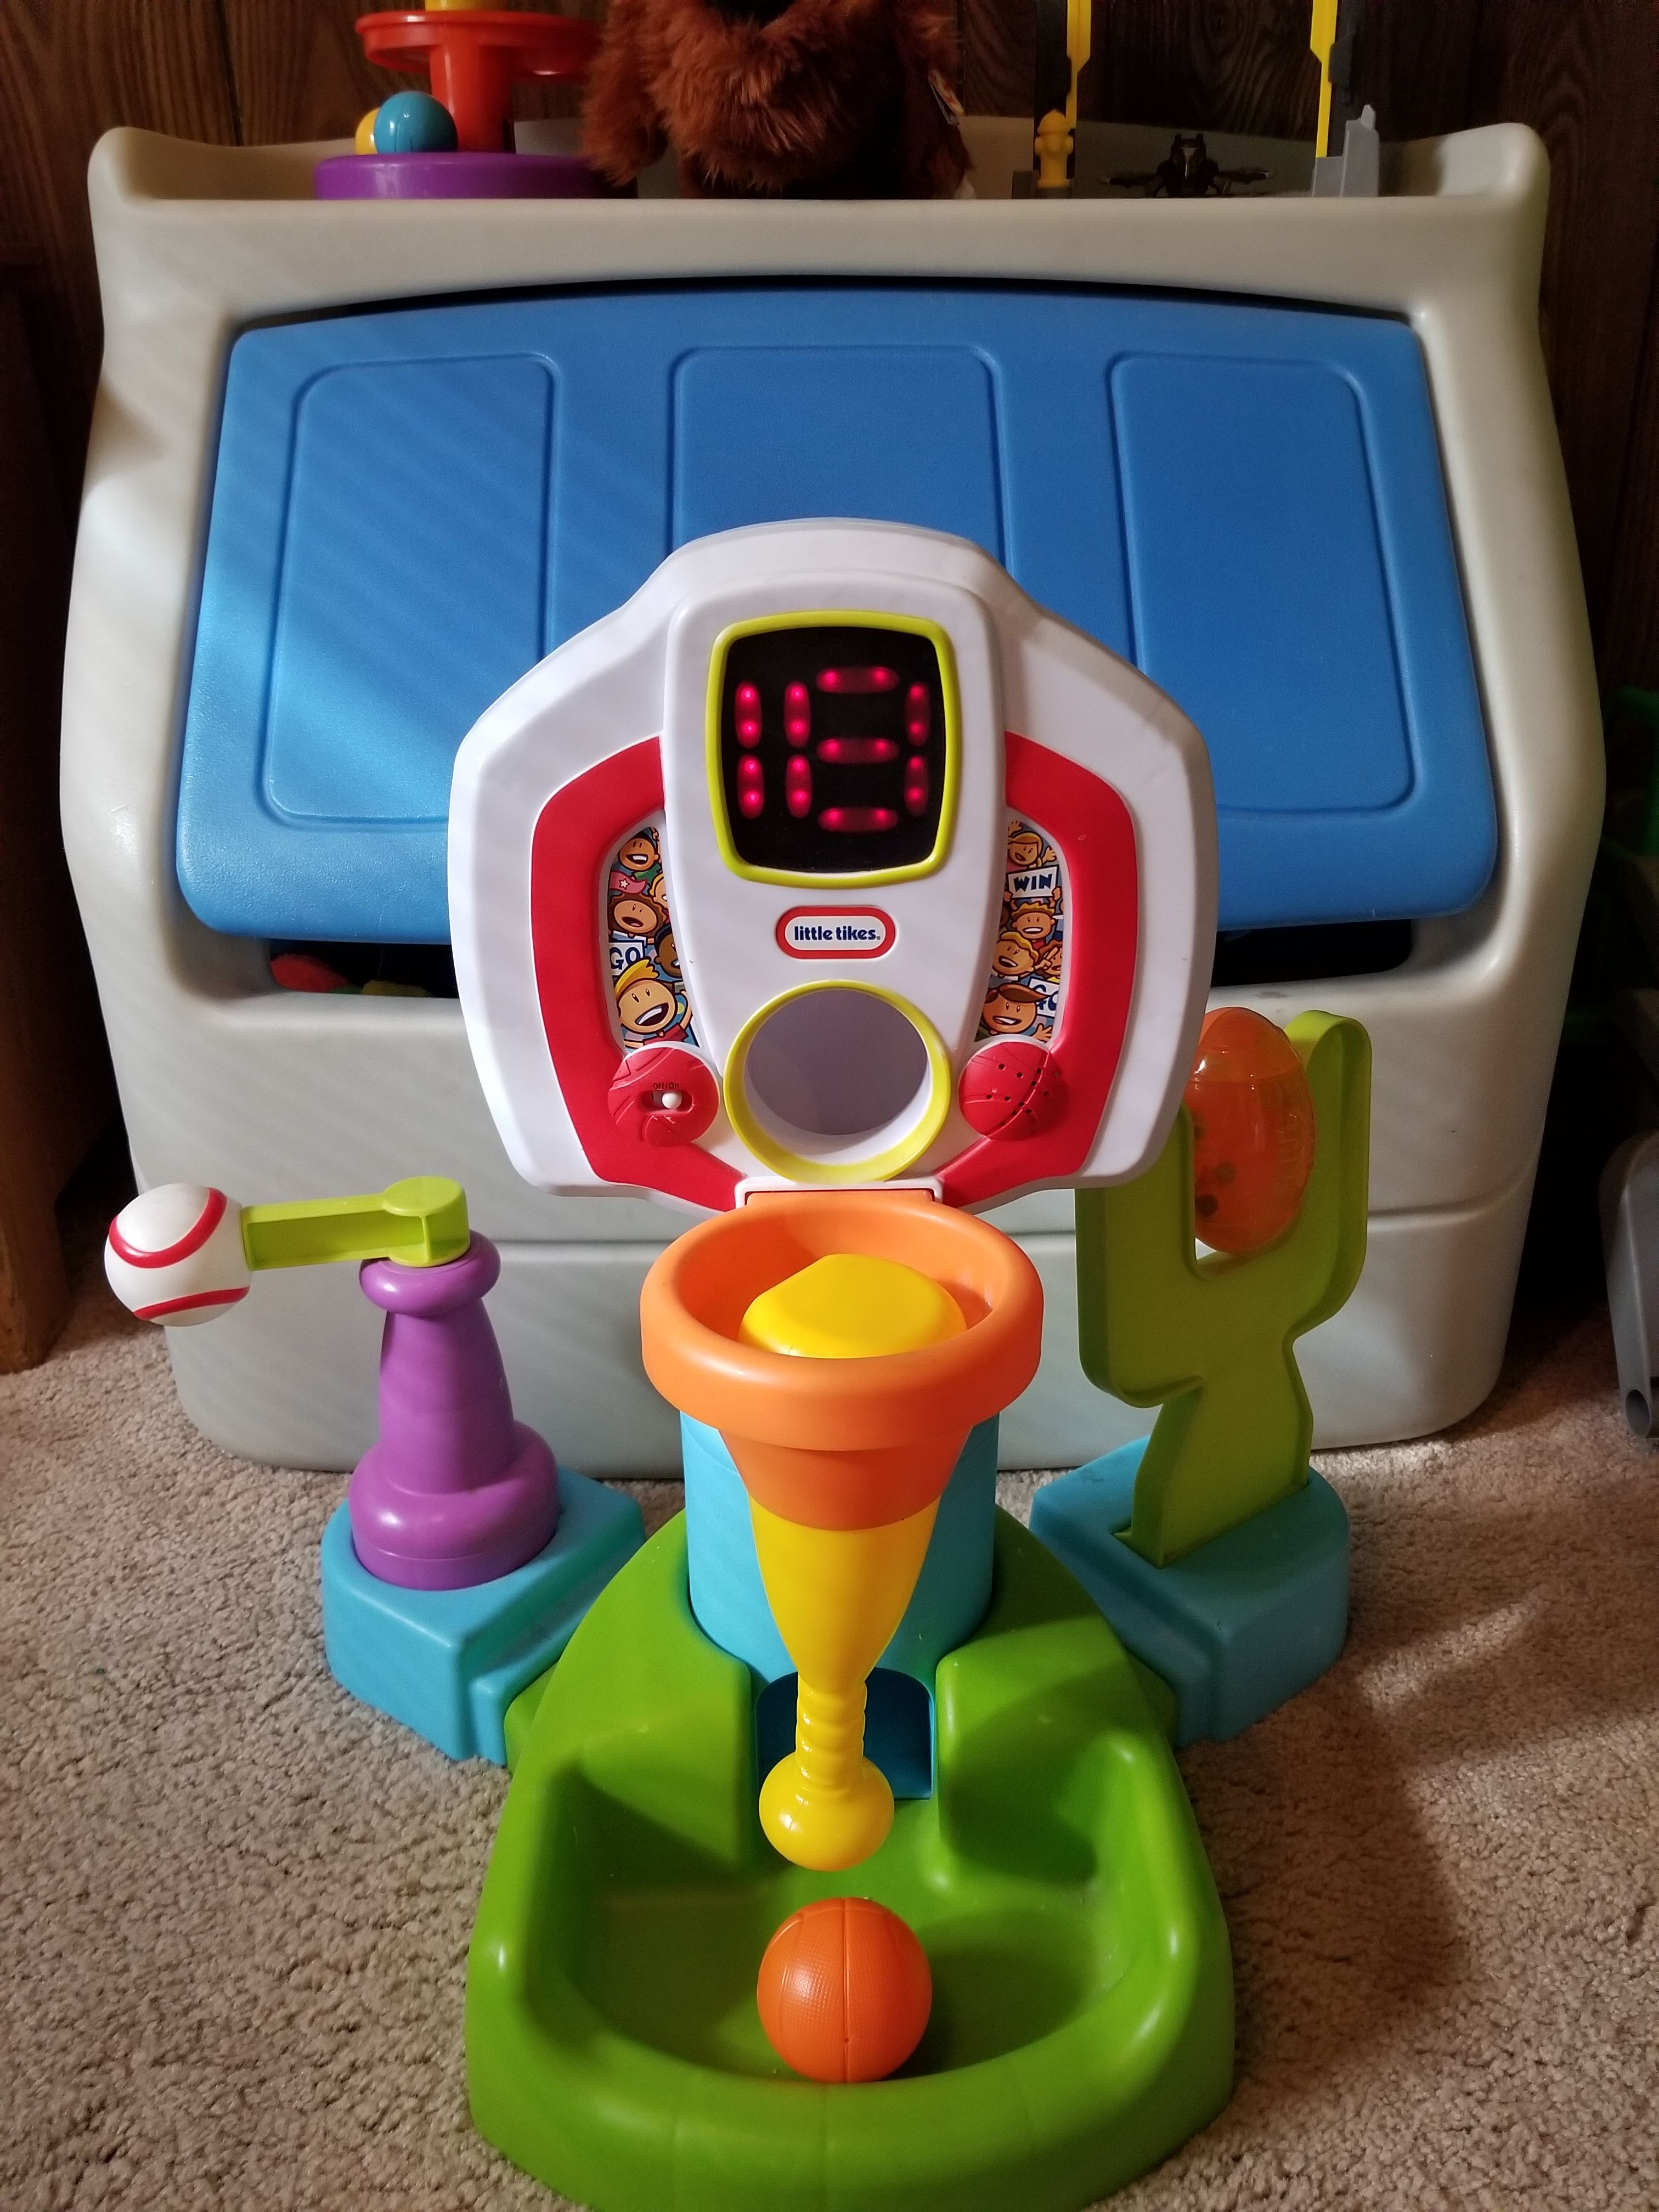 Little tikes baby toy